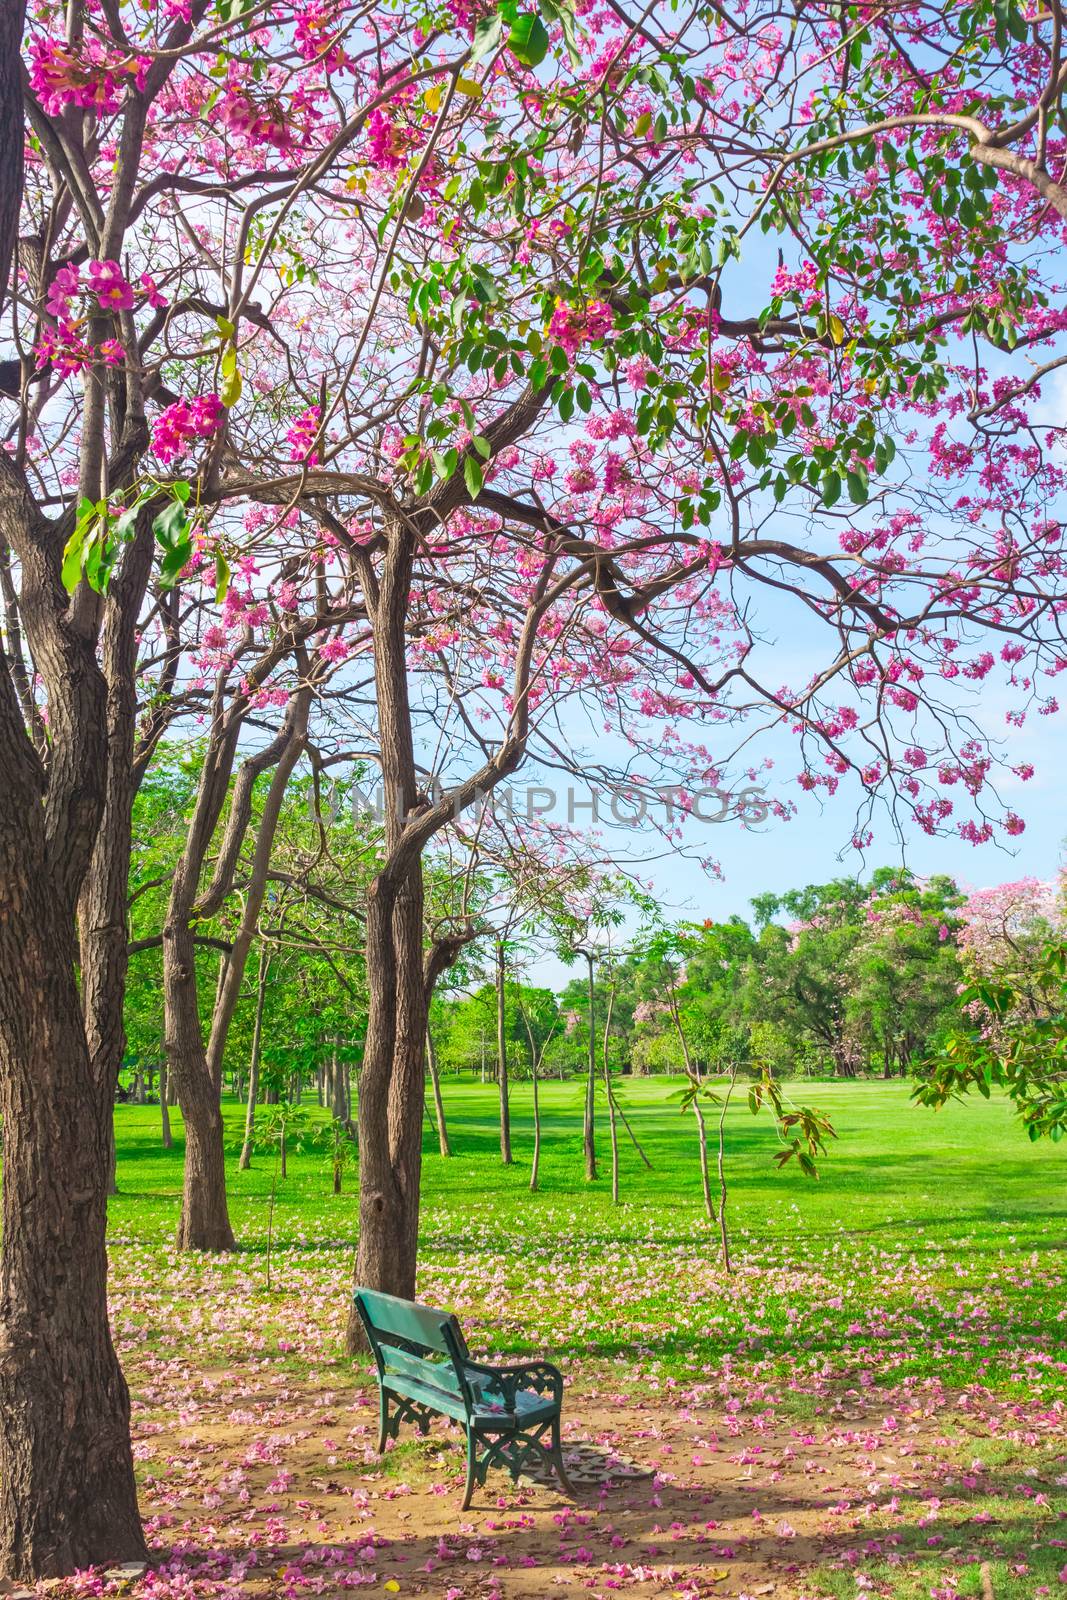 Flowers of pink trumpet trees are blossoming in Public park of Bangkok, Thailand by ronnarong